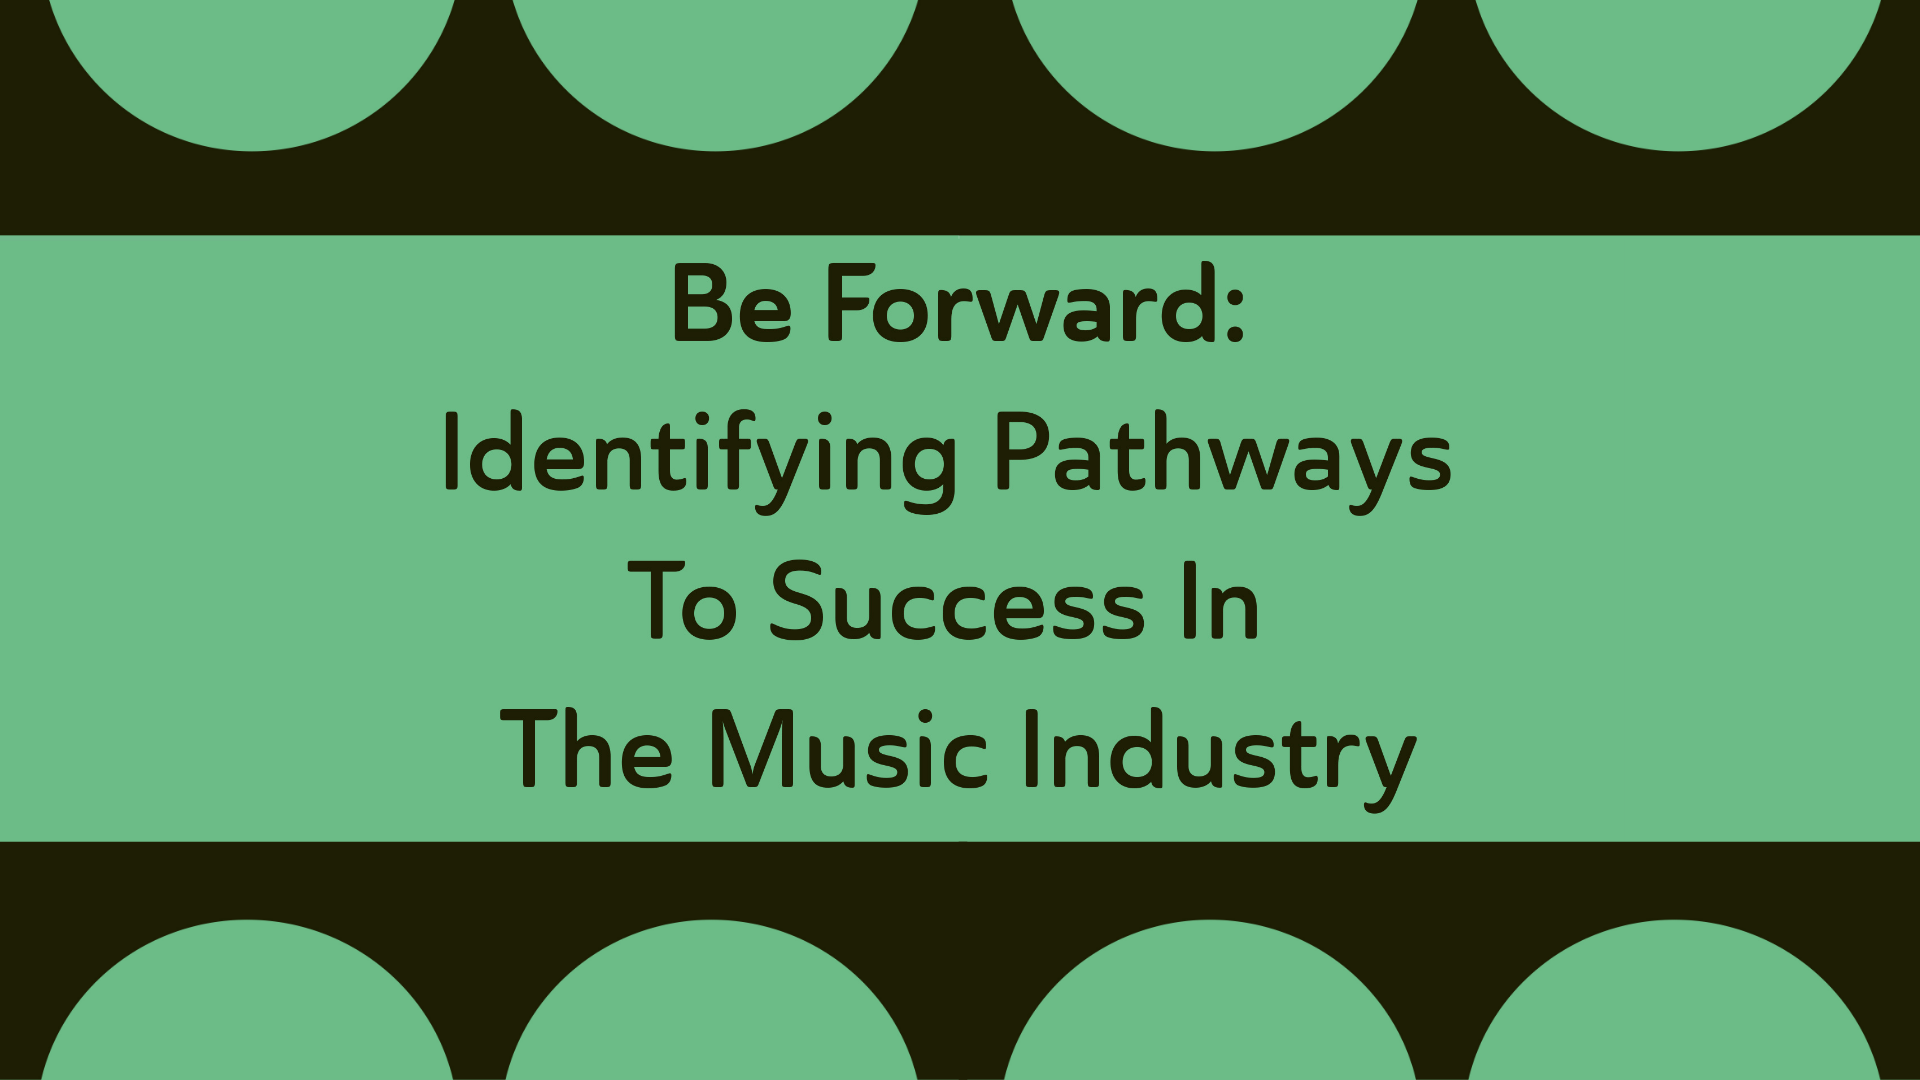 Be Forward: Identifying Pathways To Success In The Music Industry